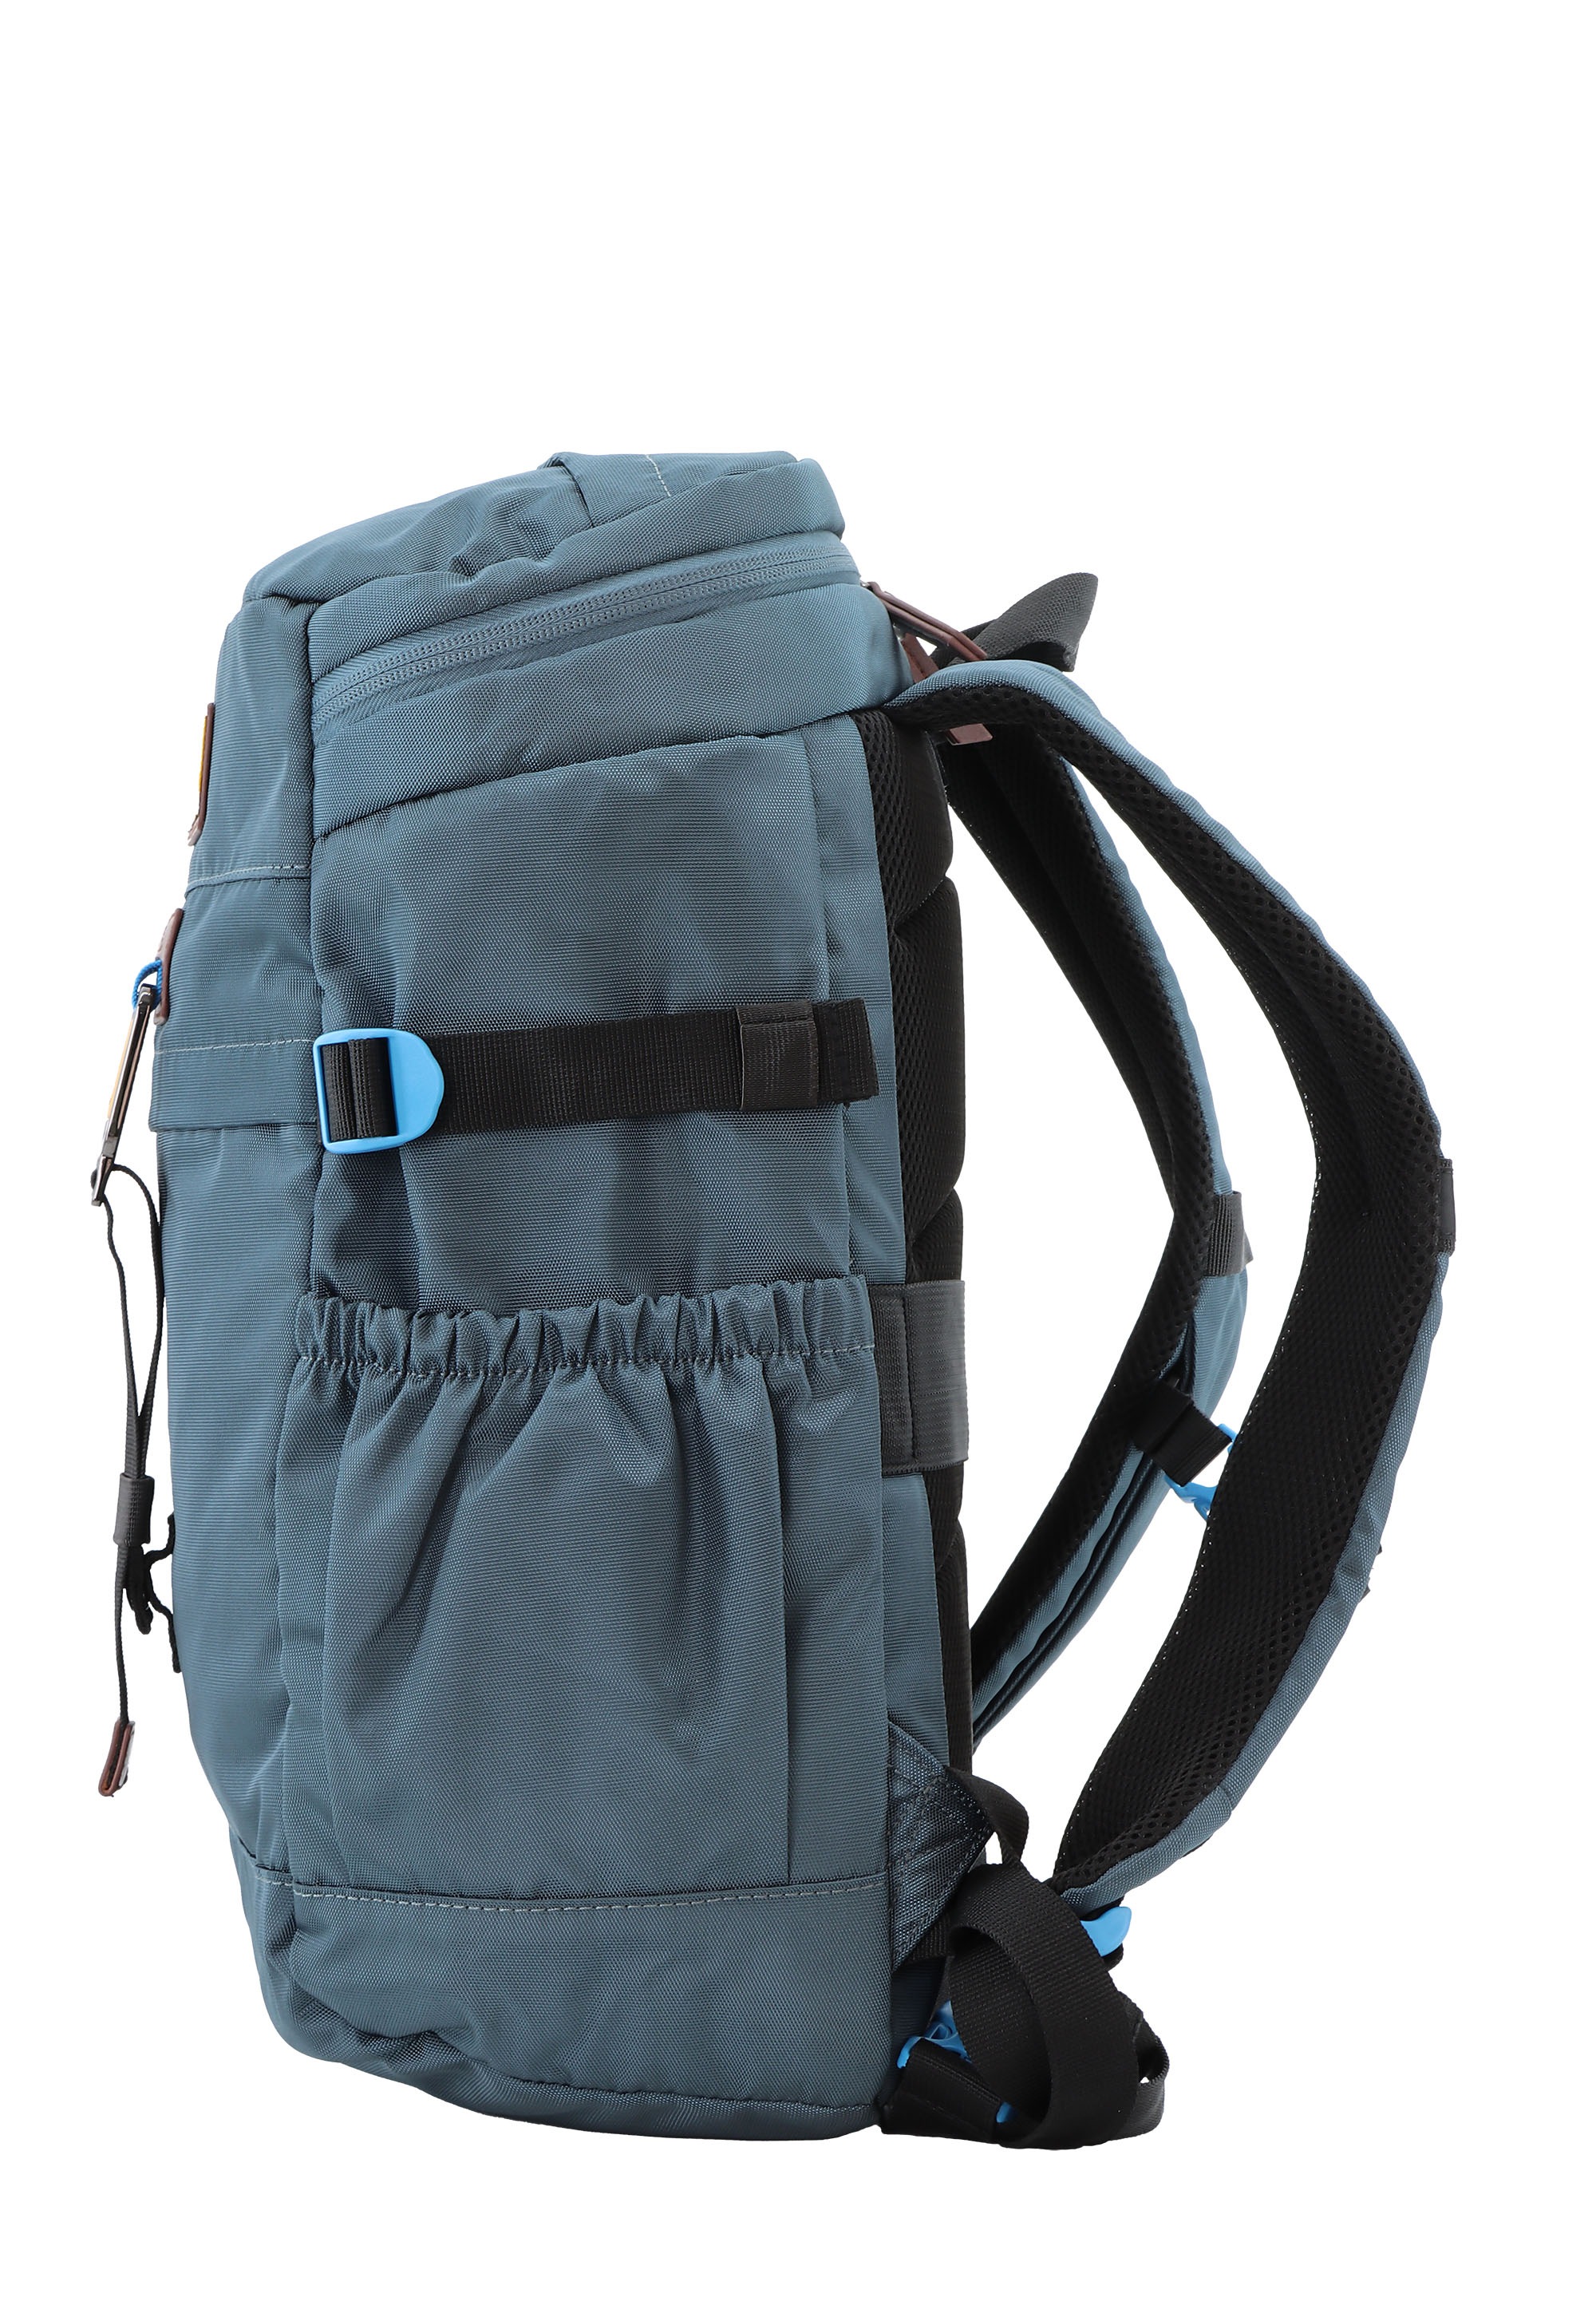 Discovery Sportrucksack »Icon«, aus robustem rPet Polyester-Material